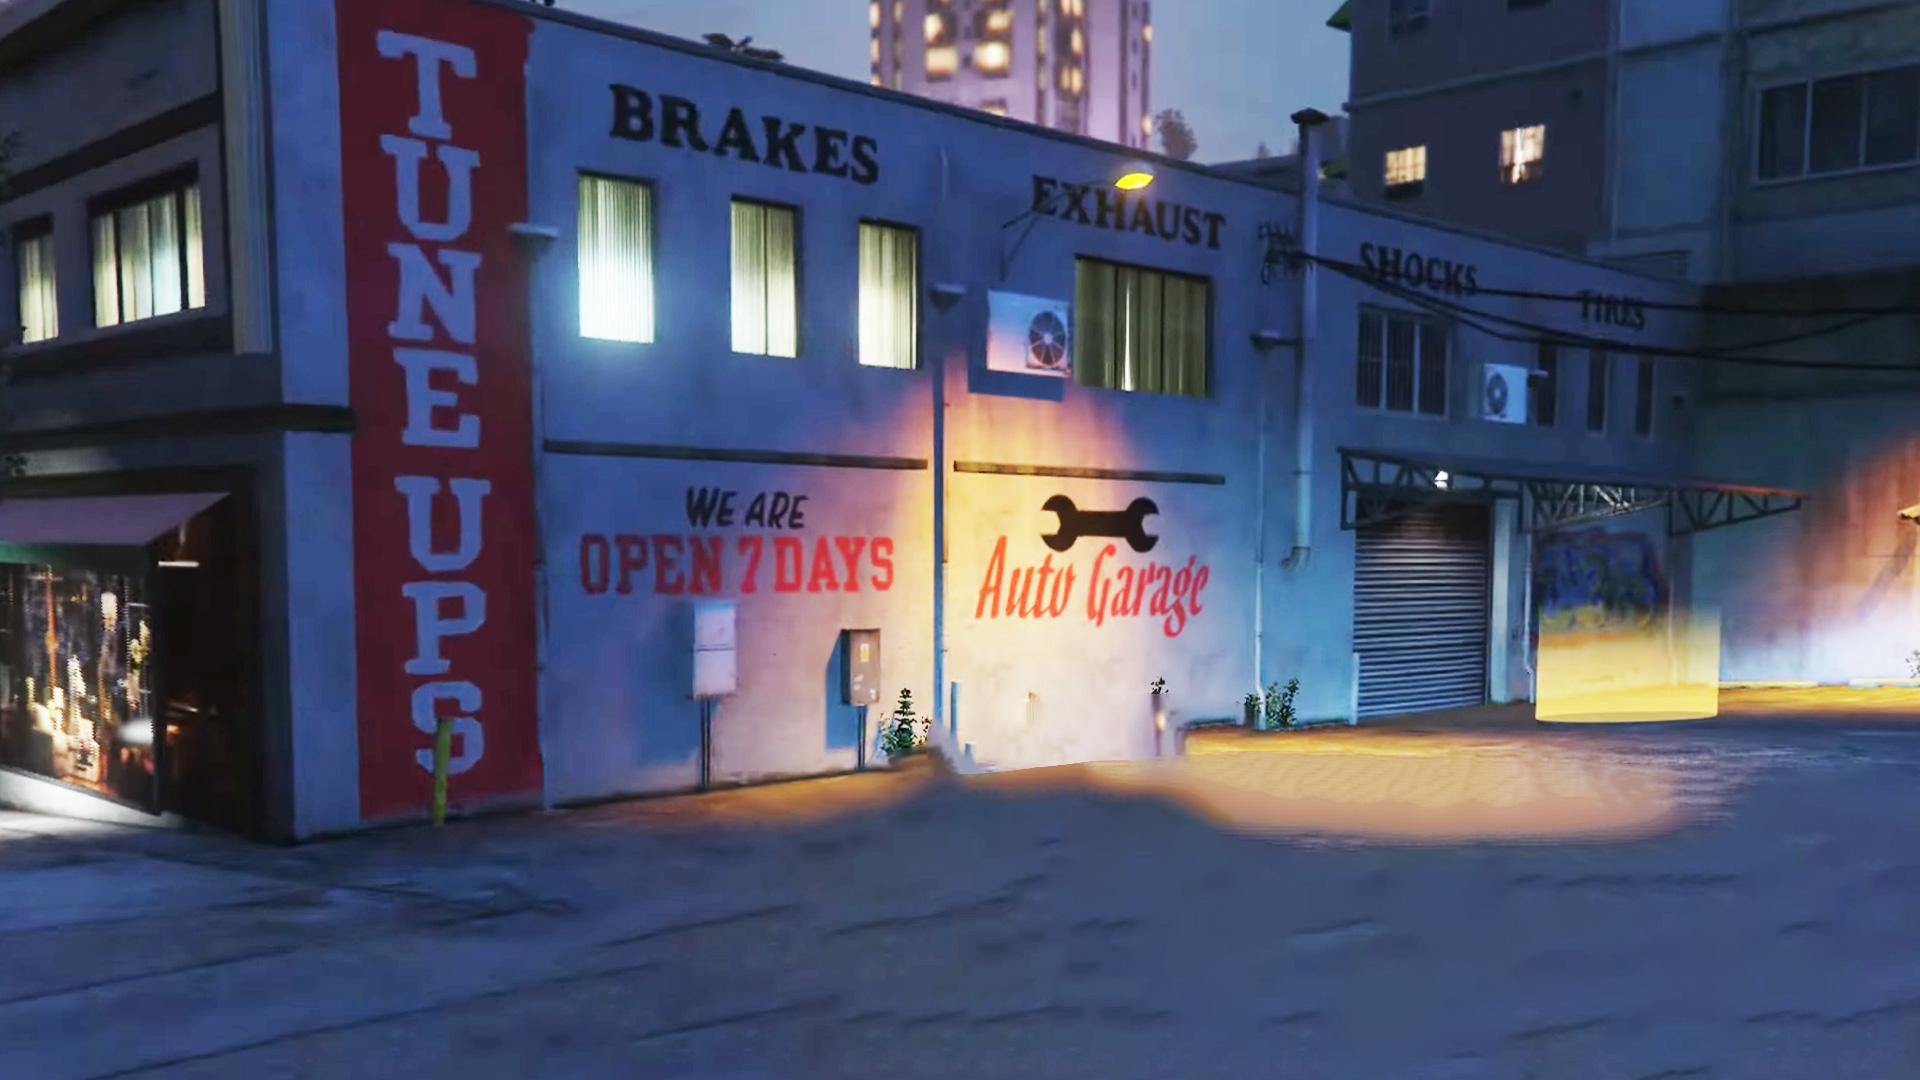 See Los Santos, The Town That Plays LA In Grand Theft Auto V